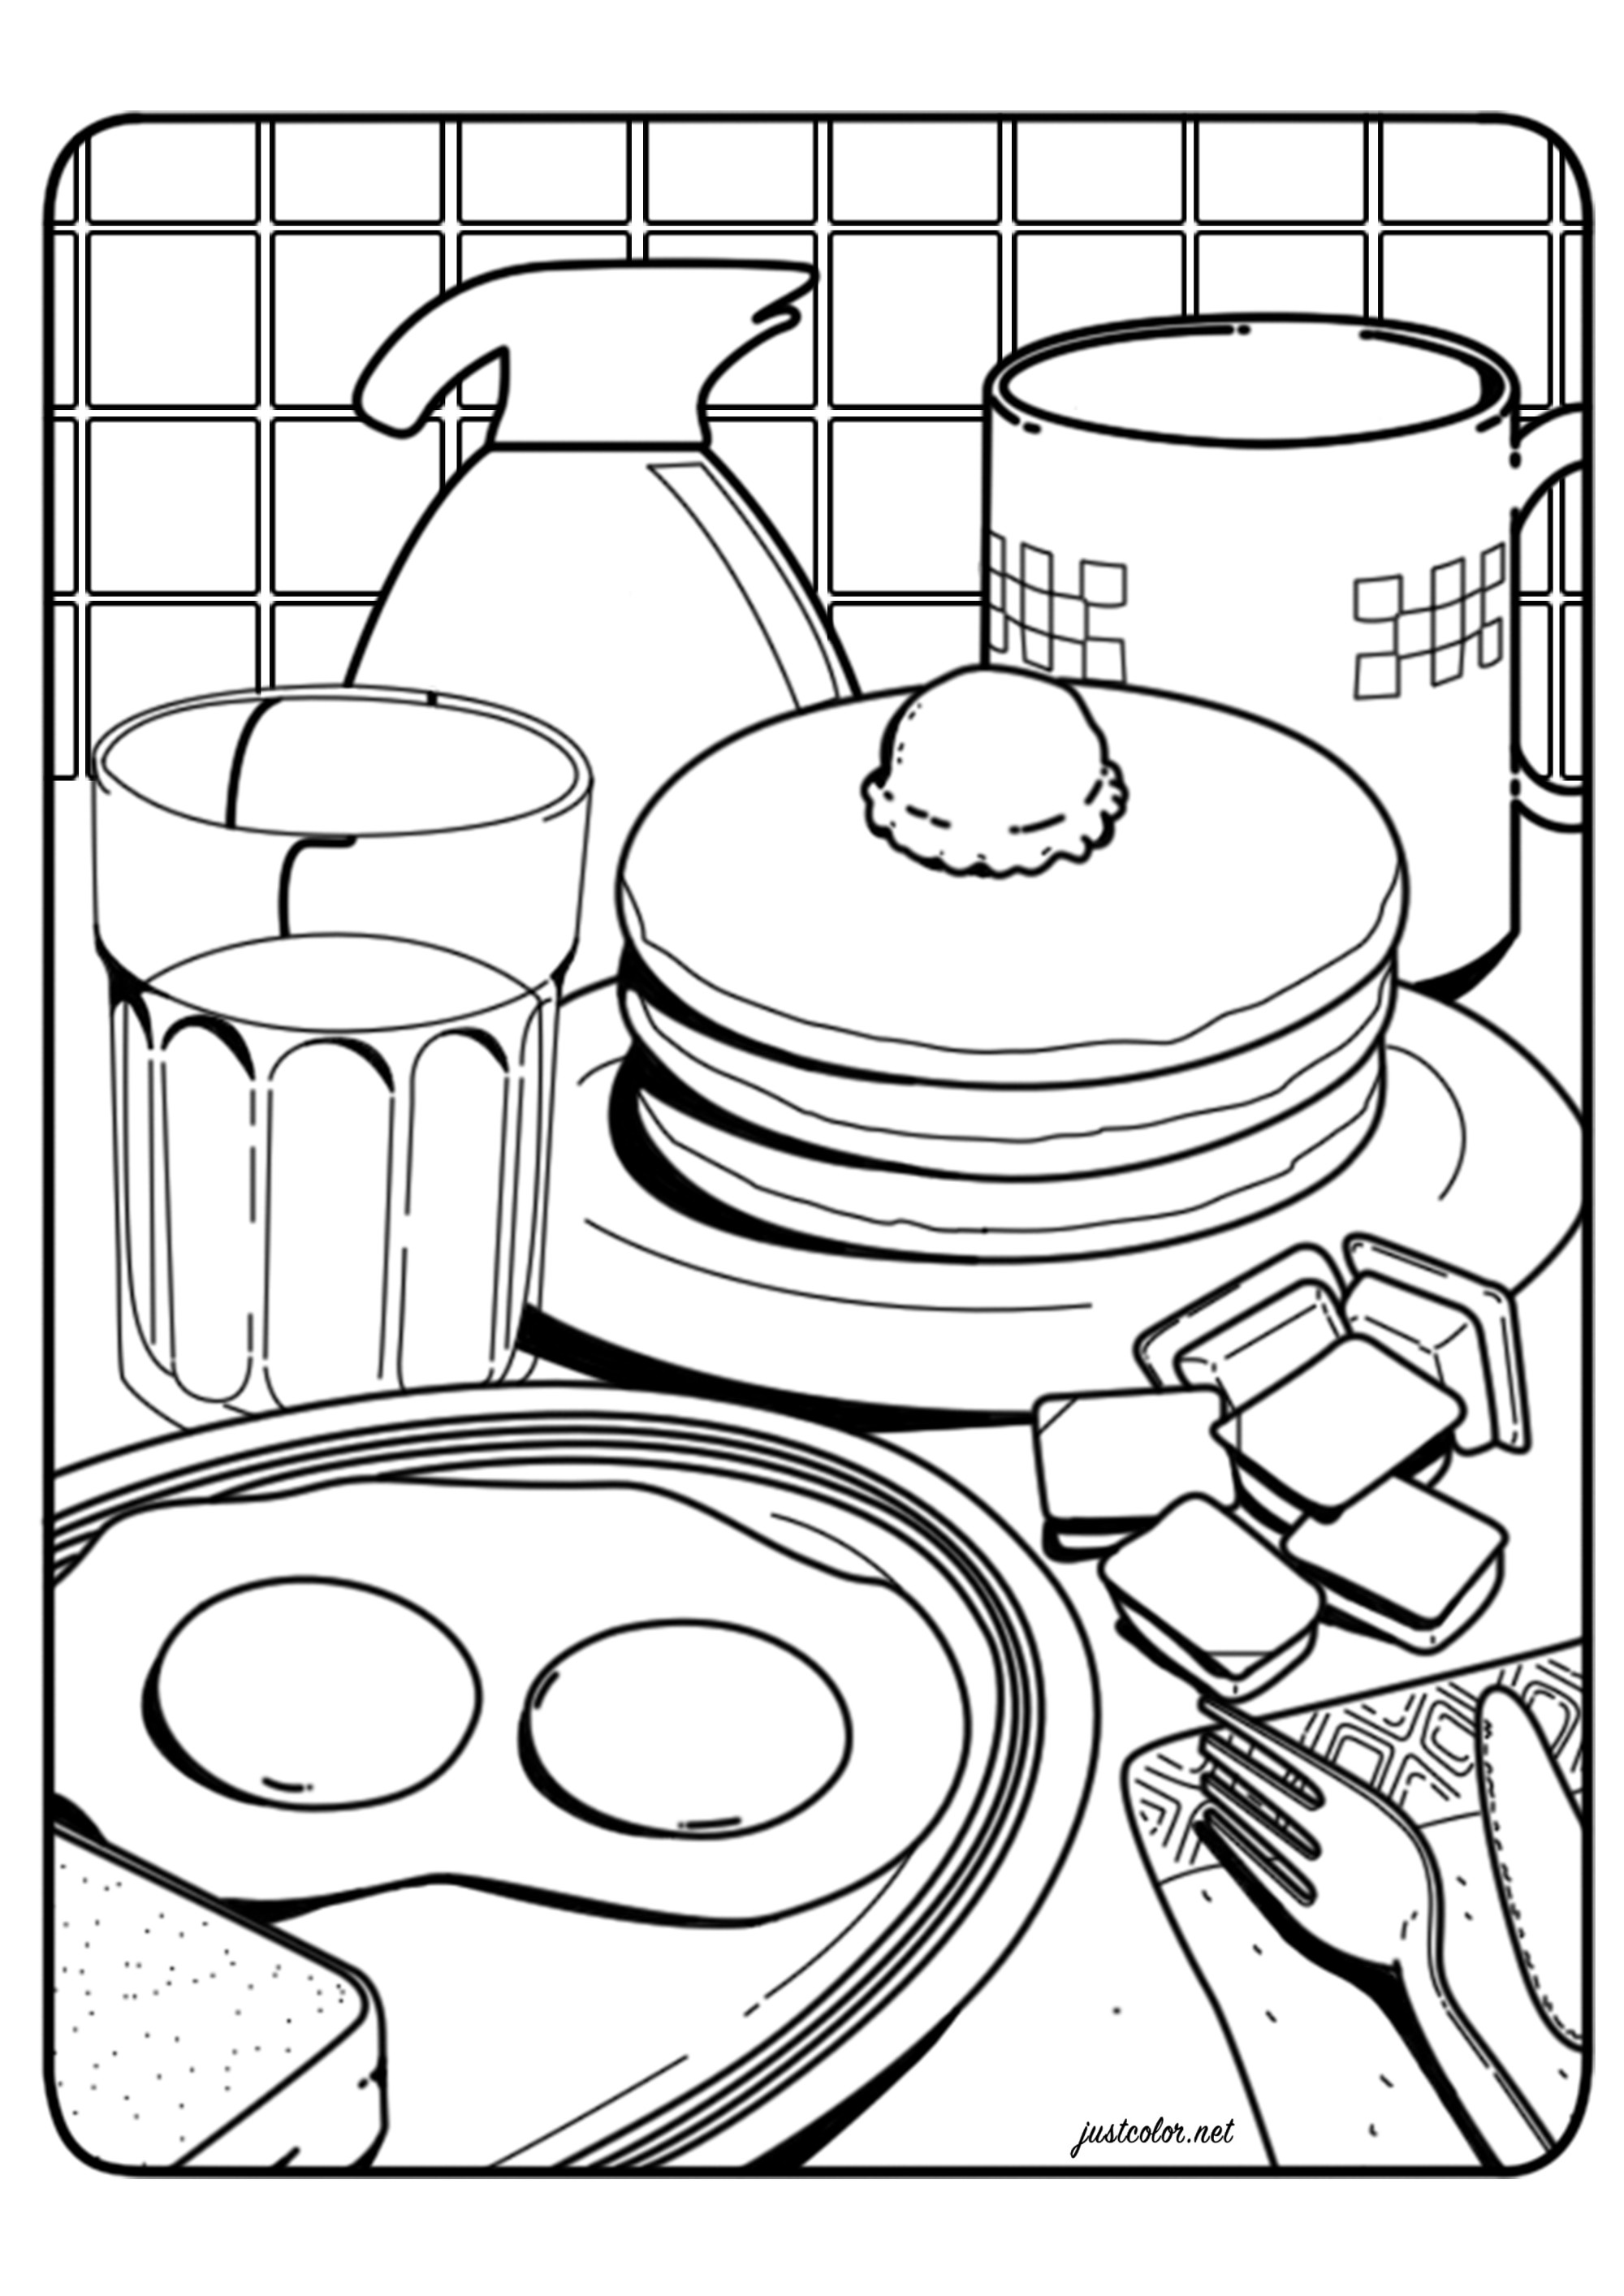 A good breakfast with fried eggs, pancakes, coffee...  a coloring page inspired by the illustration 'The Breakfast' by Lauren Martin, Artist : Warrick D